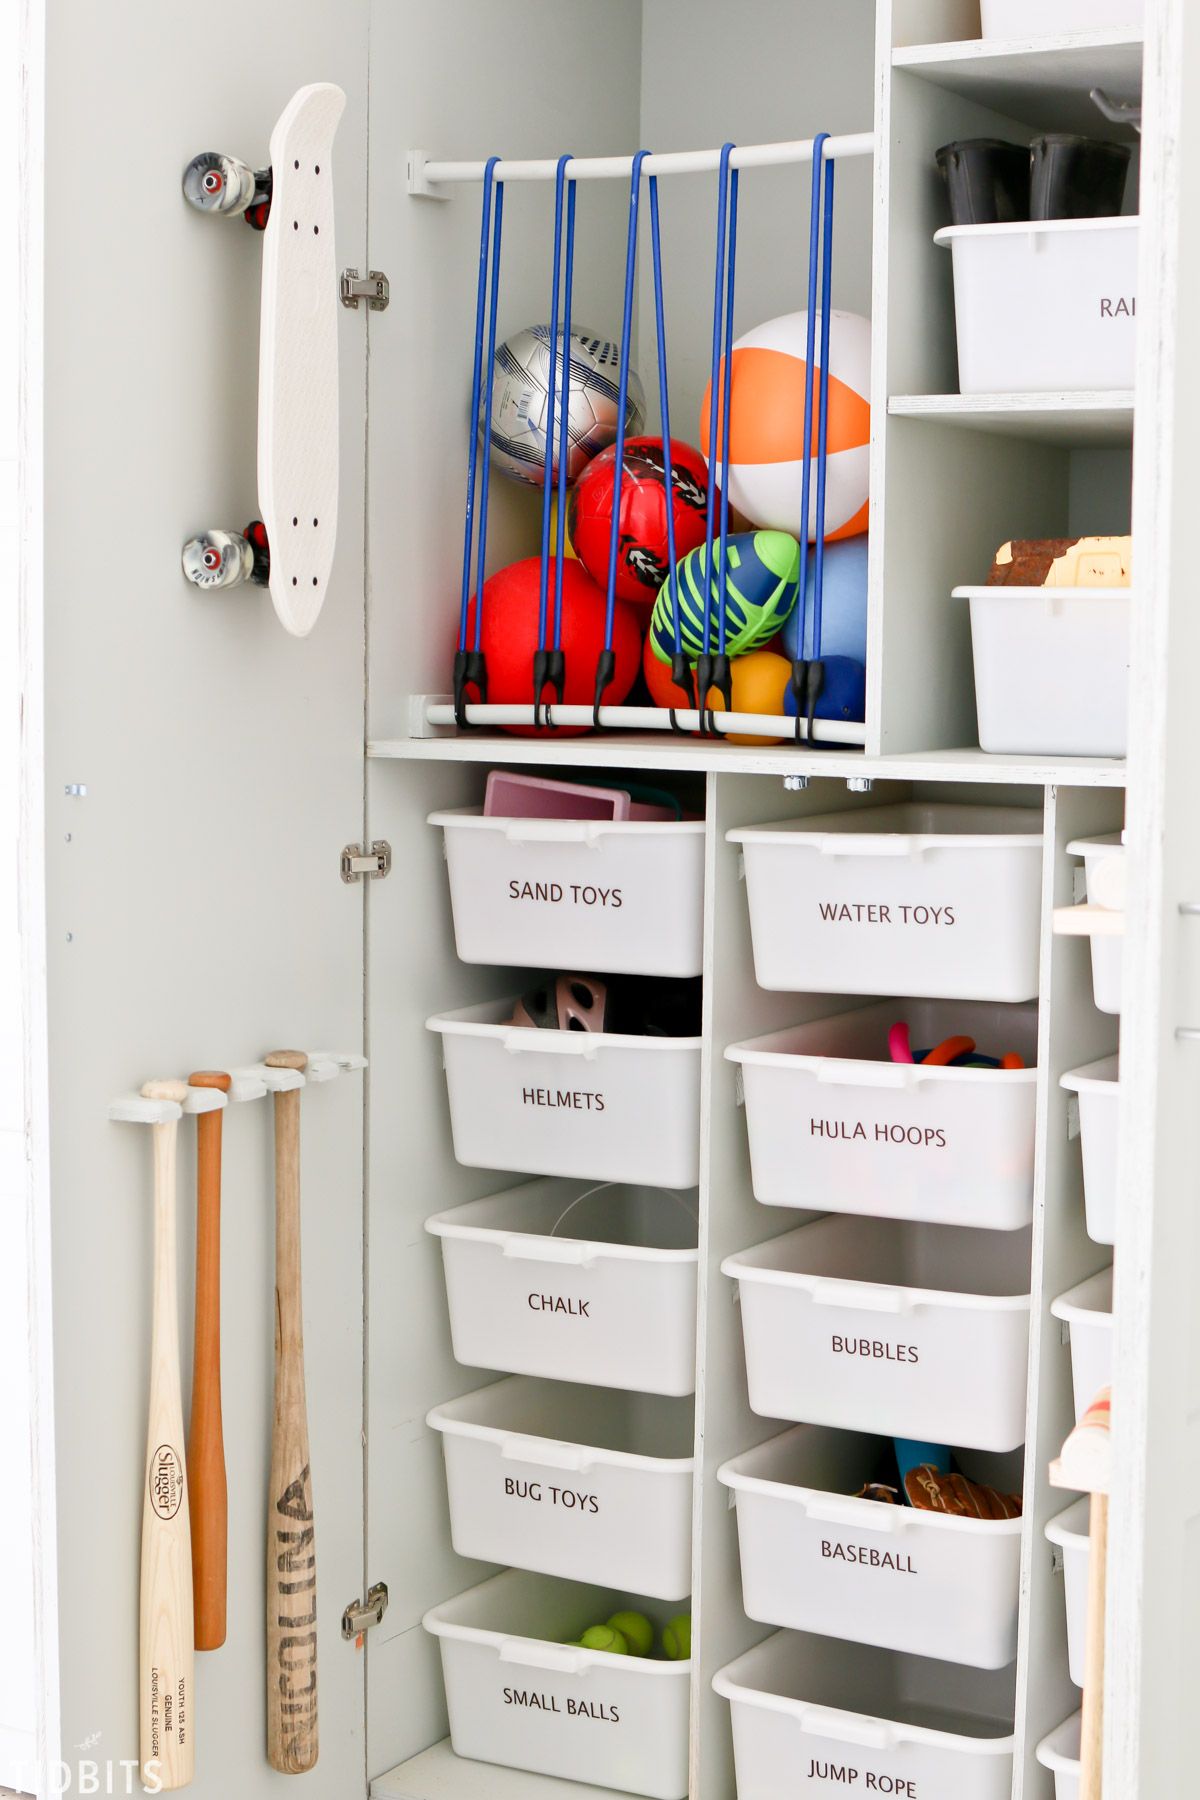 The Best Toy Organizing Ideas for Your Home